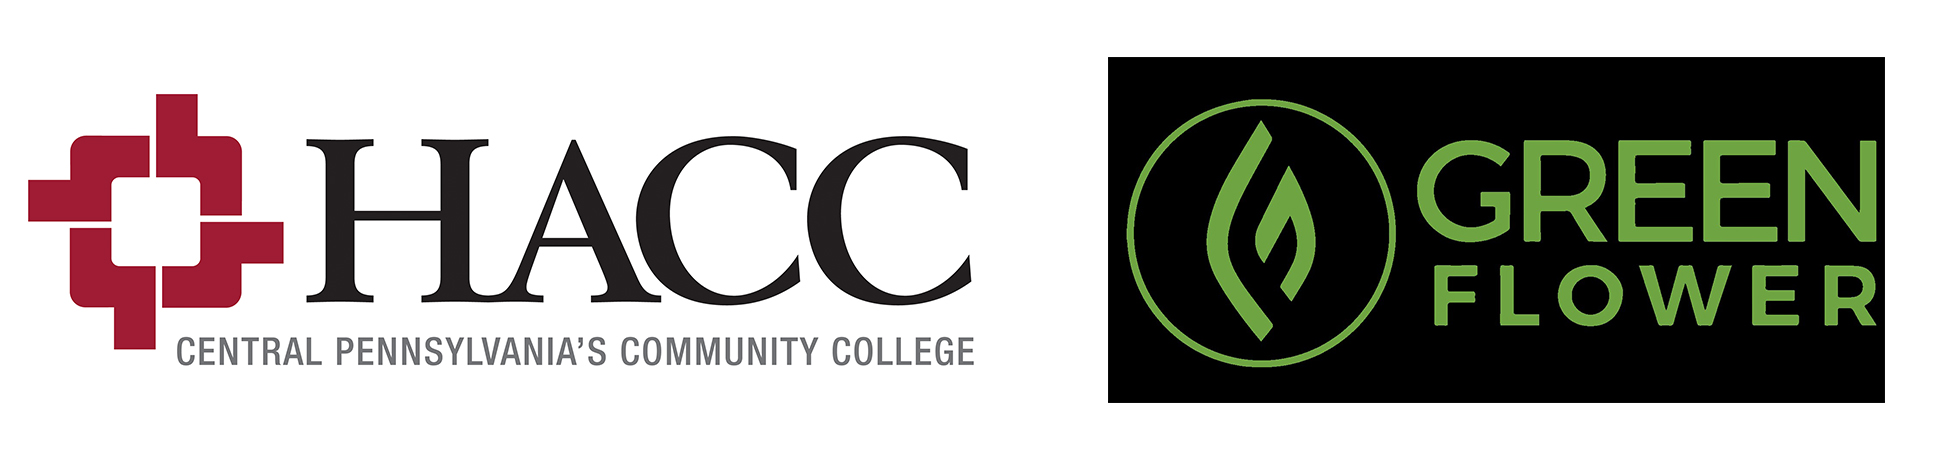 HACC and Green Flower logos